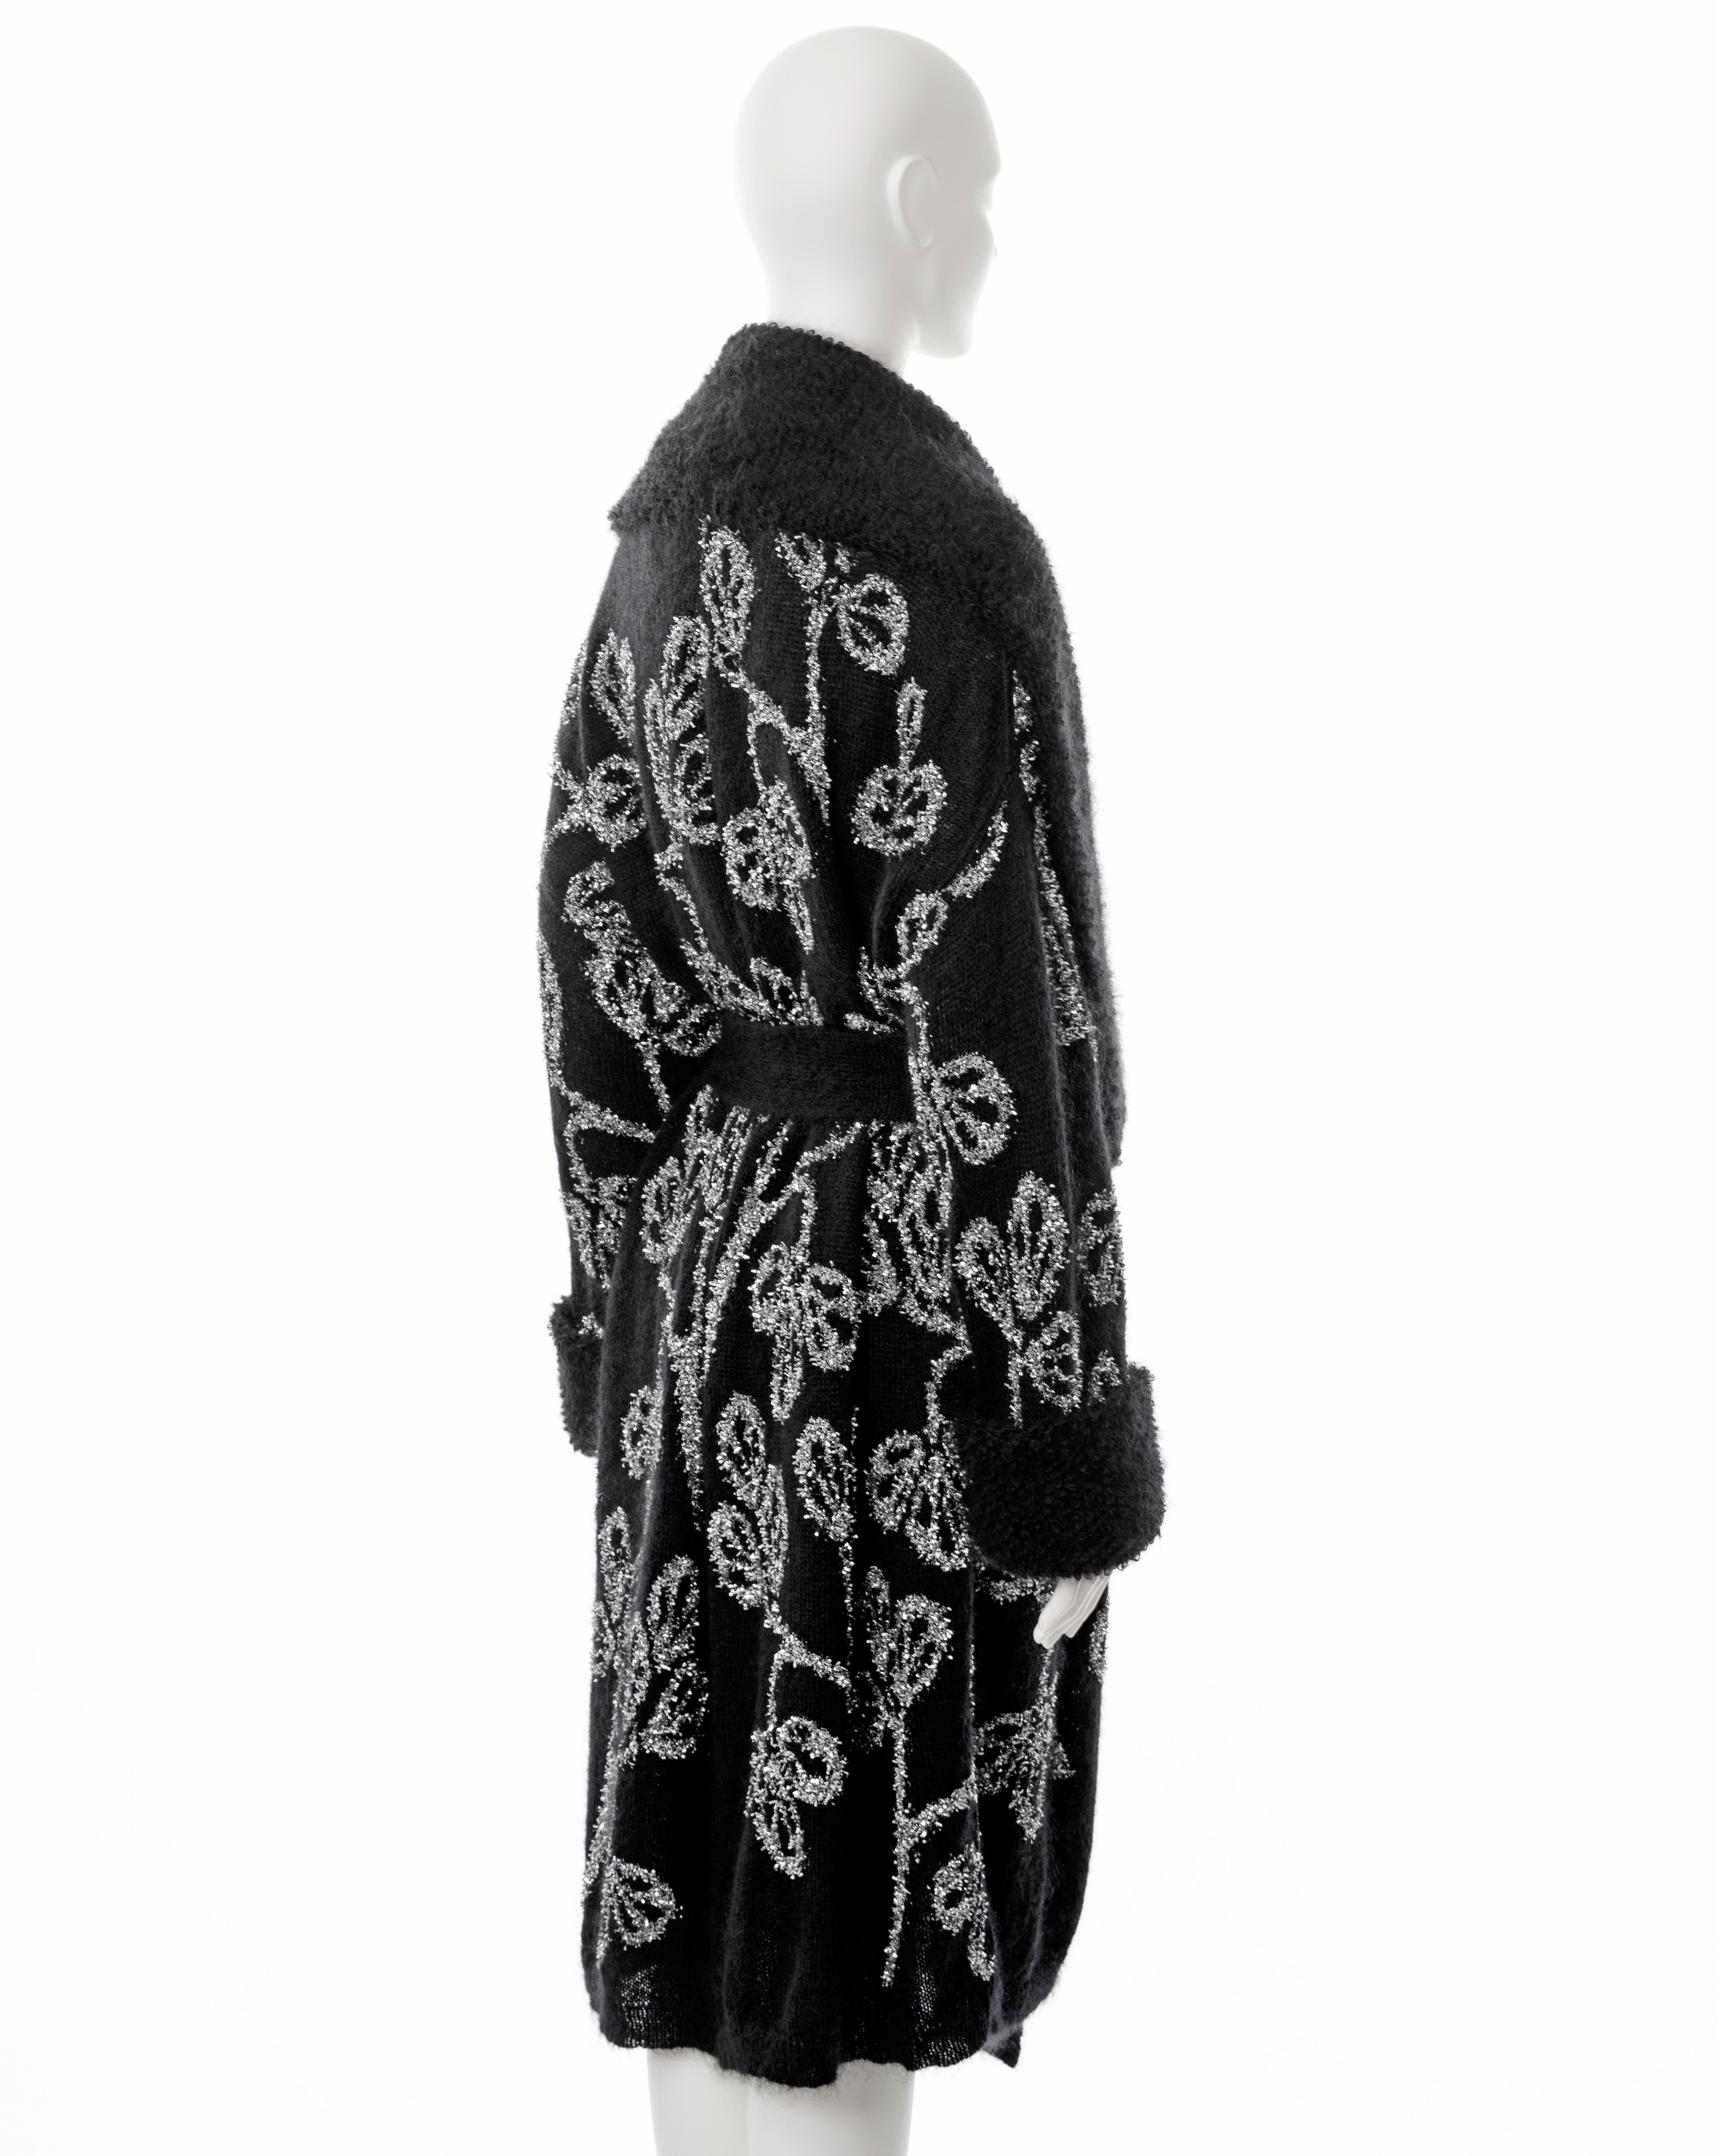 John Galliano black knitted wool cardigan with silver tinsel embroidery, ss 2003 2